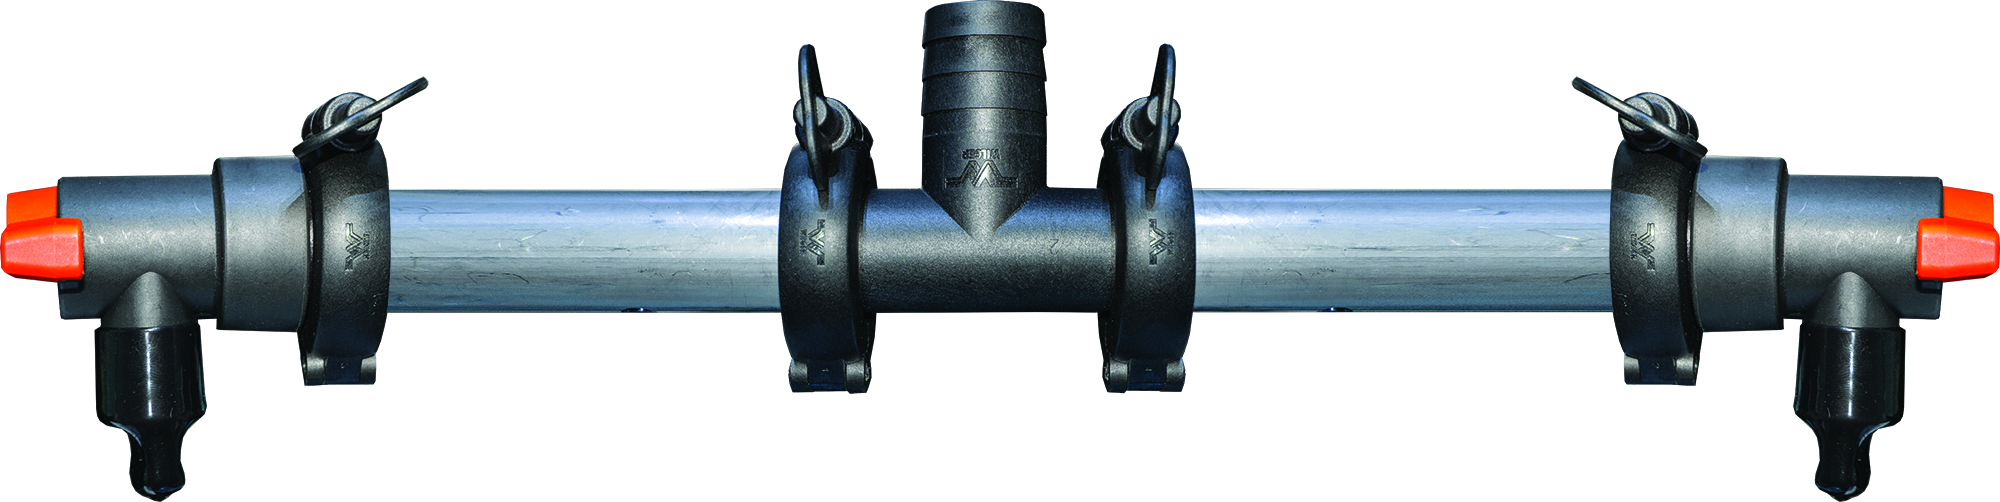 Flanged Sprayer Boom with Two end flush valves with center fed TEE